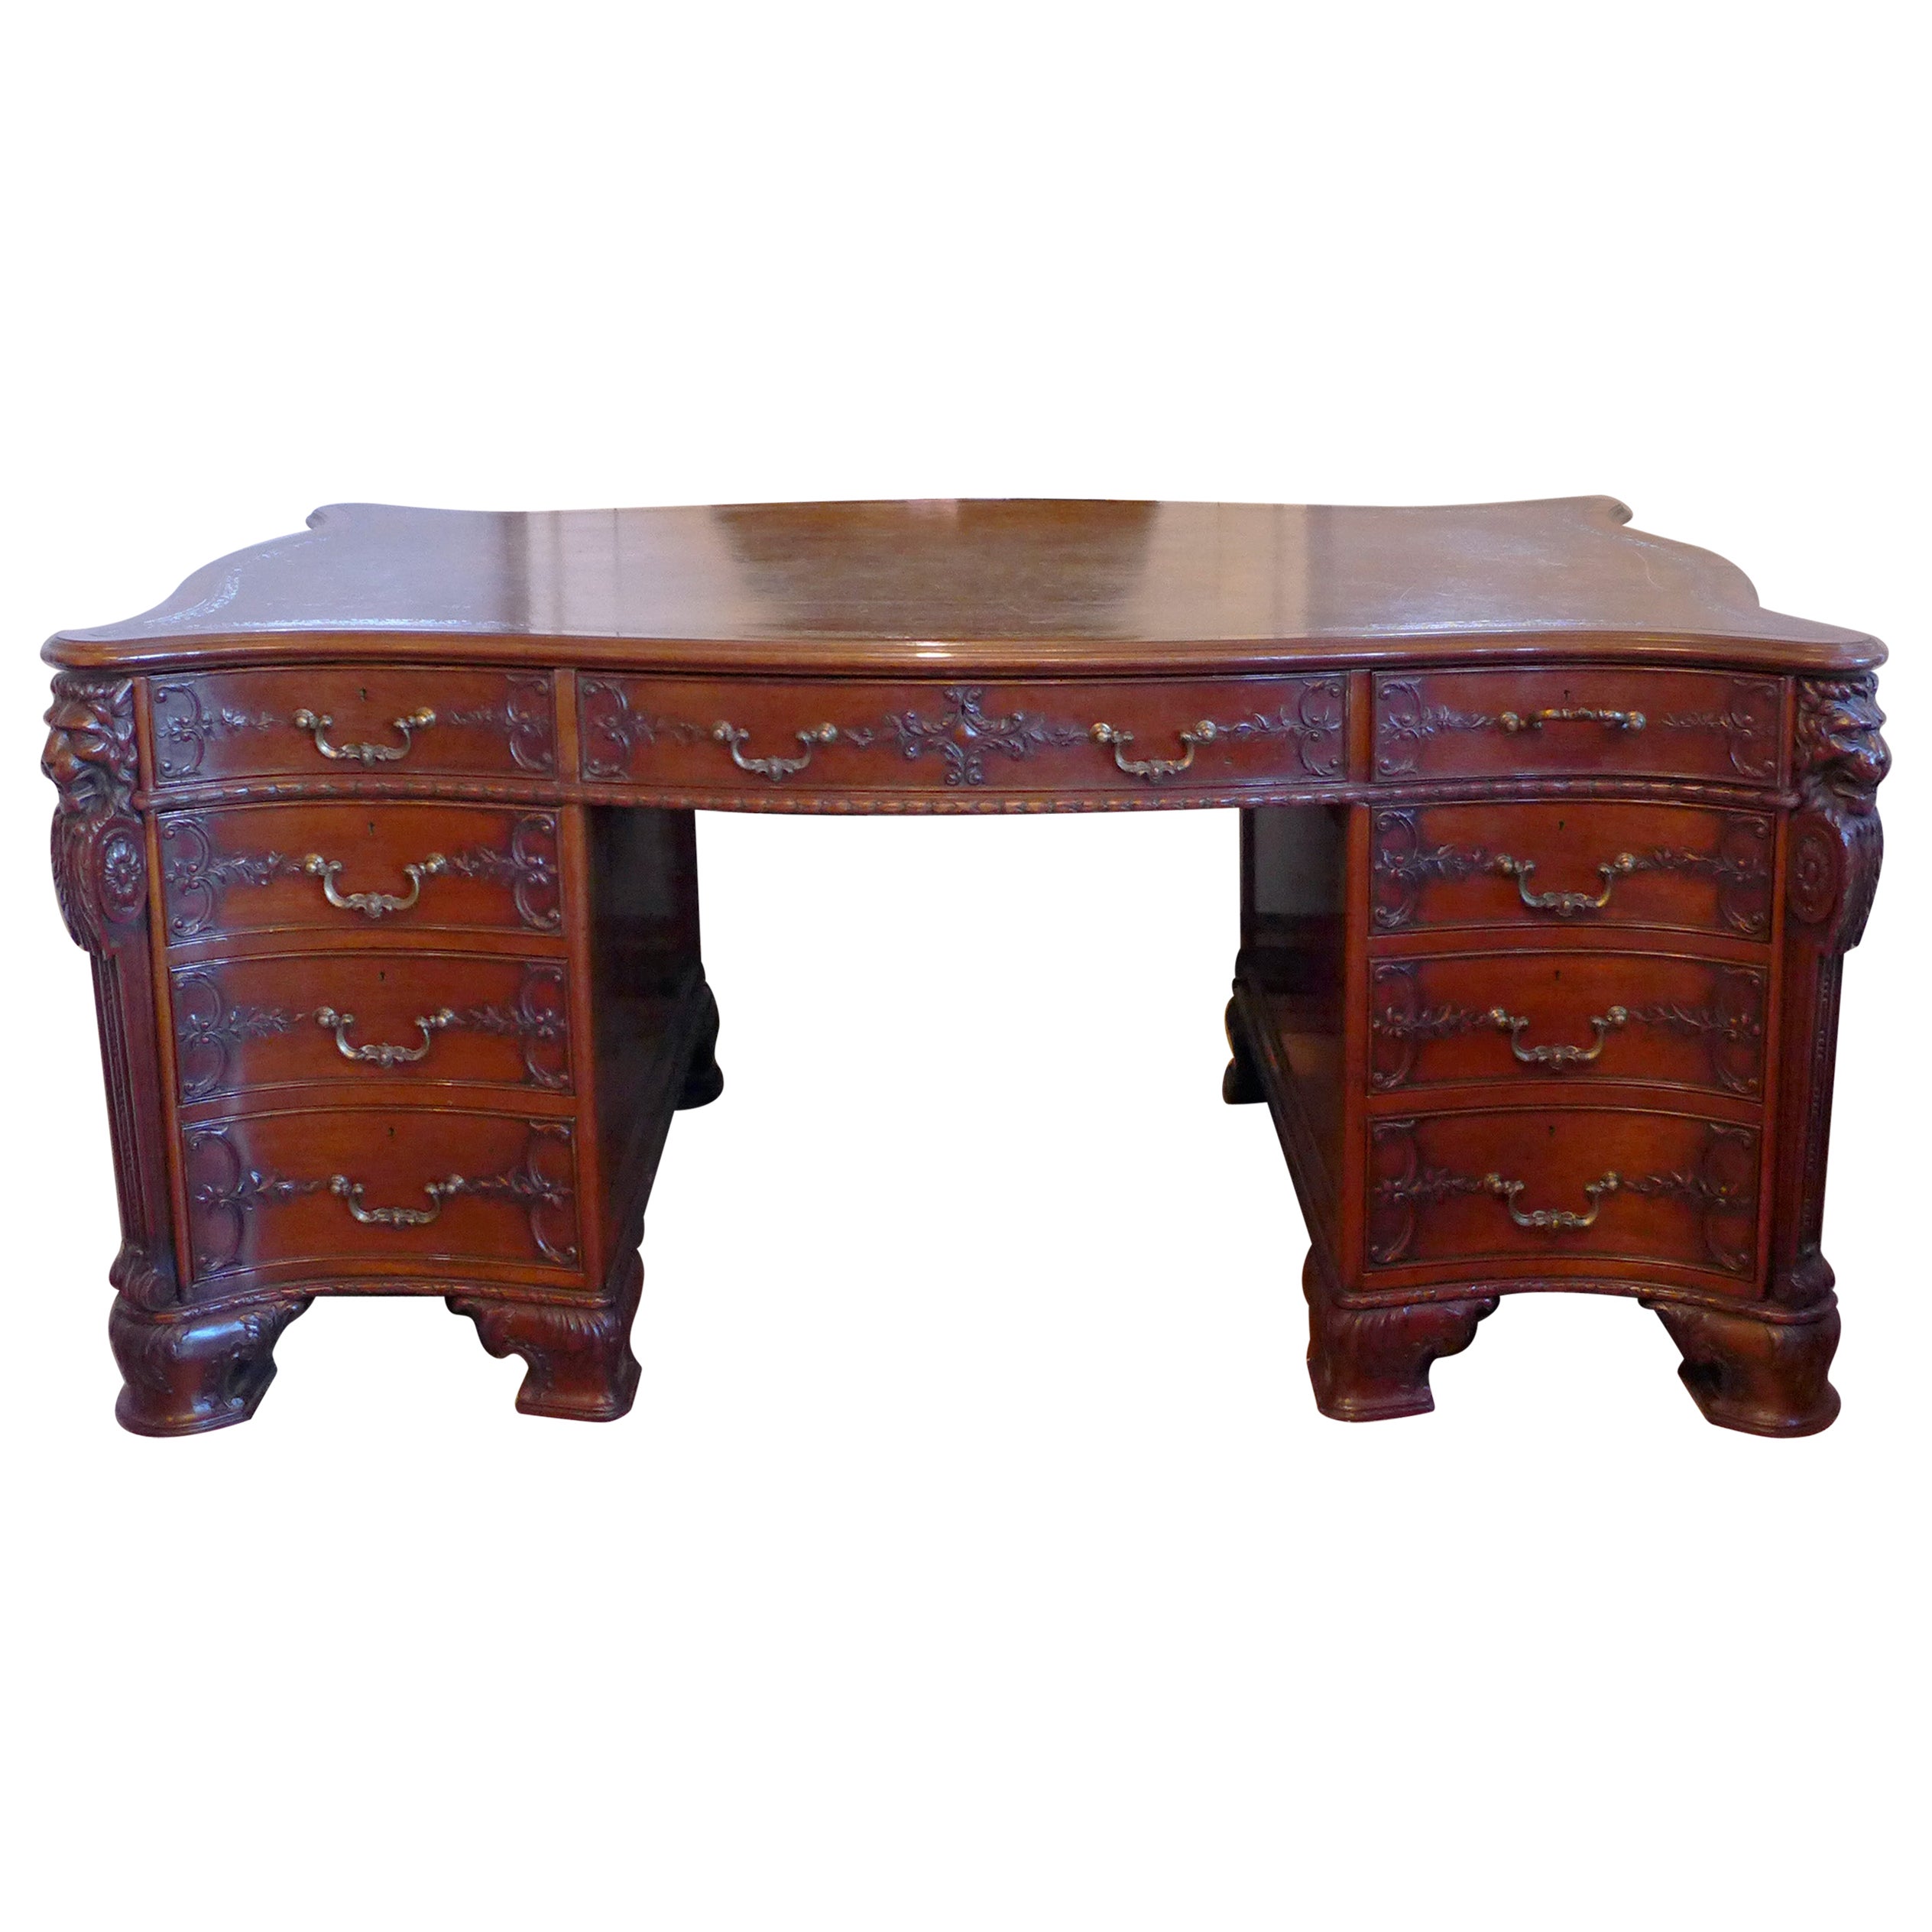 Large Solid Mahogany Victorian Gillows Serpentine Partners Desk, circa 1870 For Sale